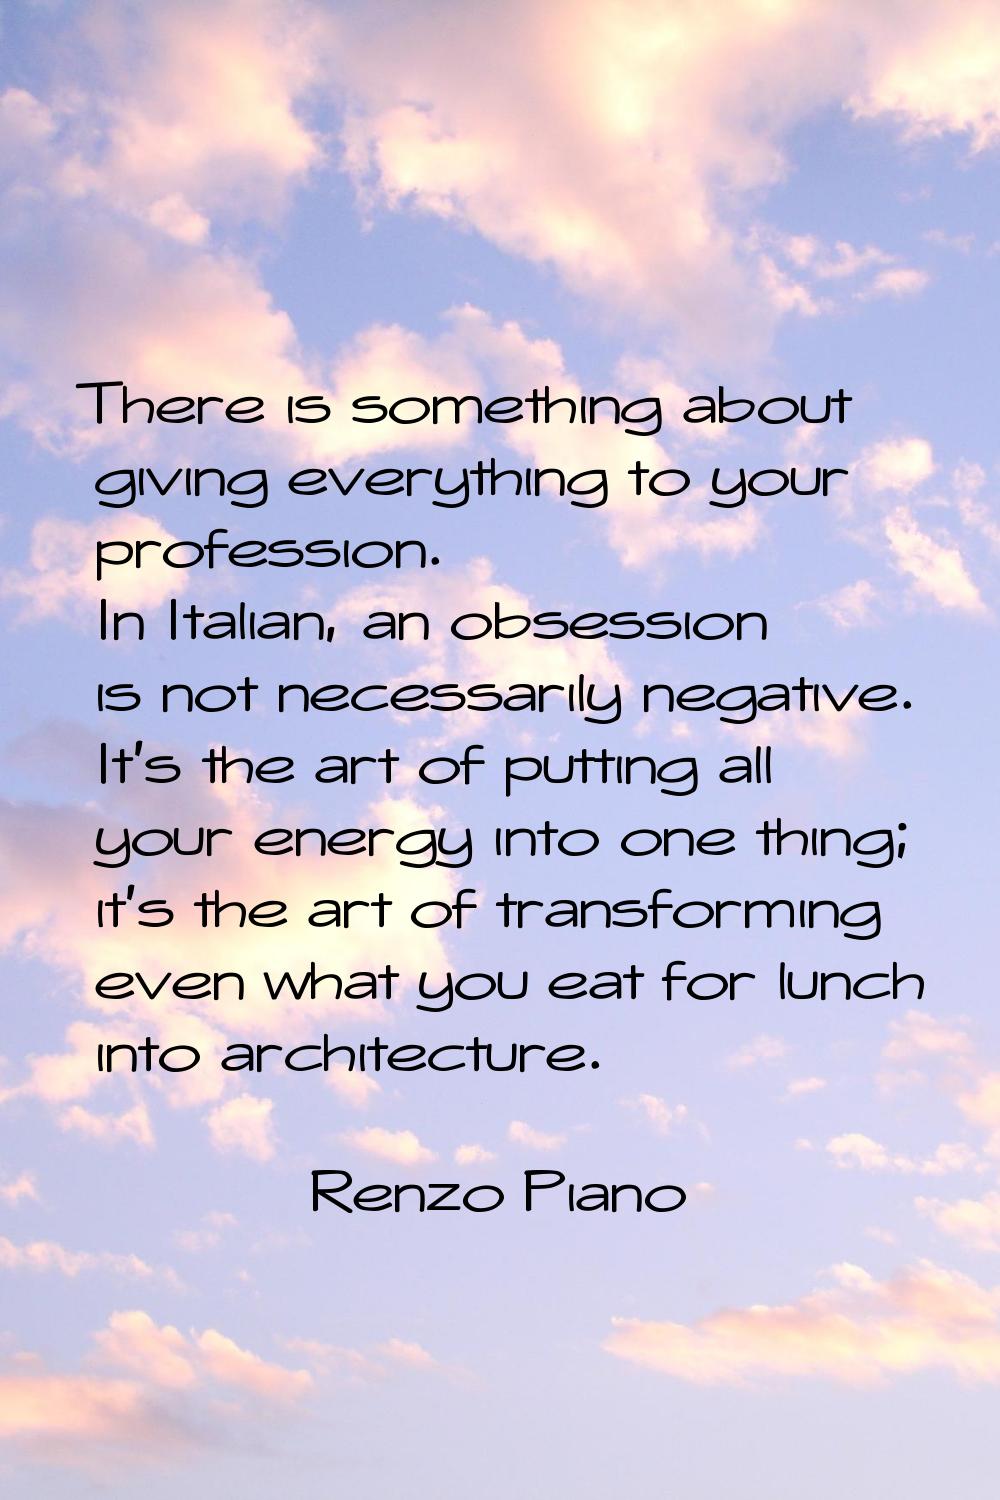 There is something about giving everything to your profession. In Italian, an obsession is not nece